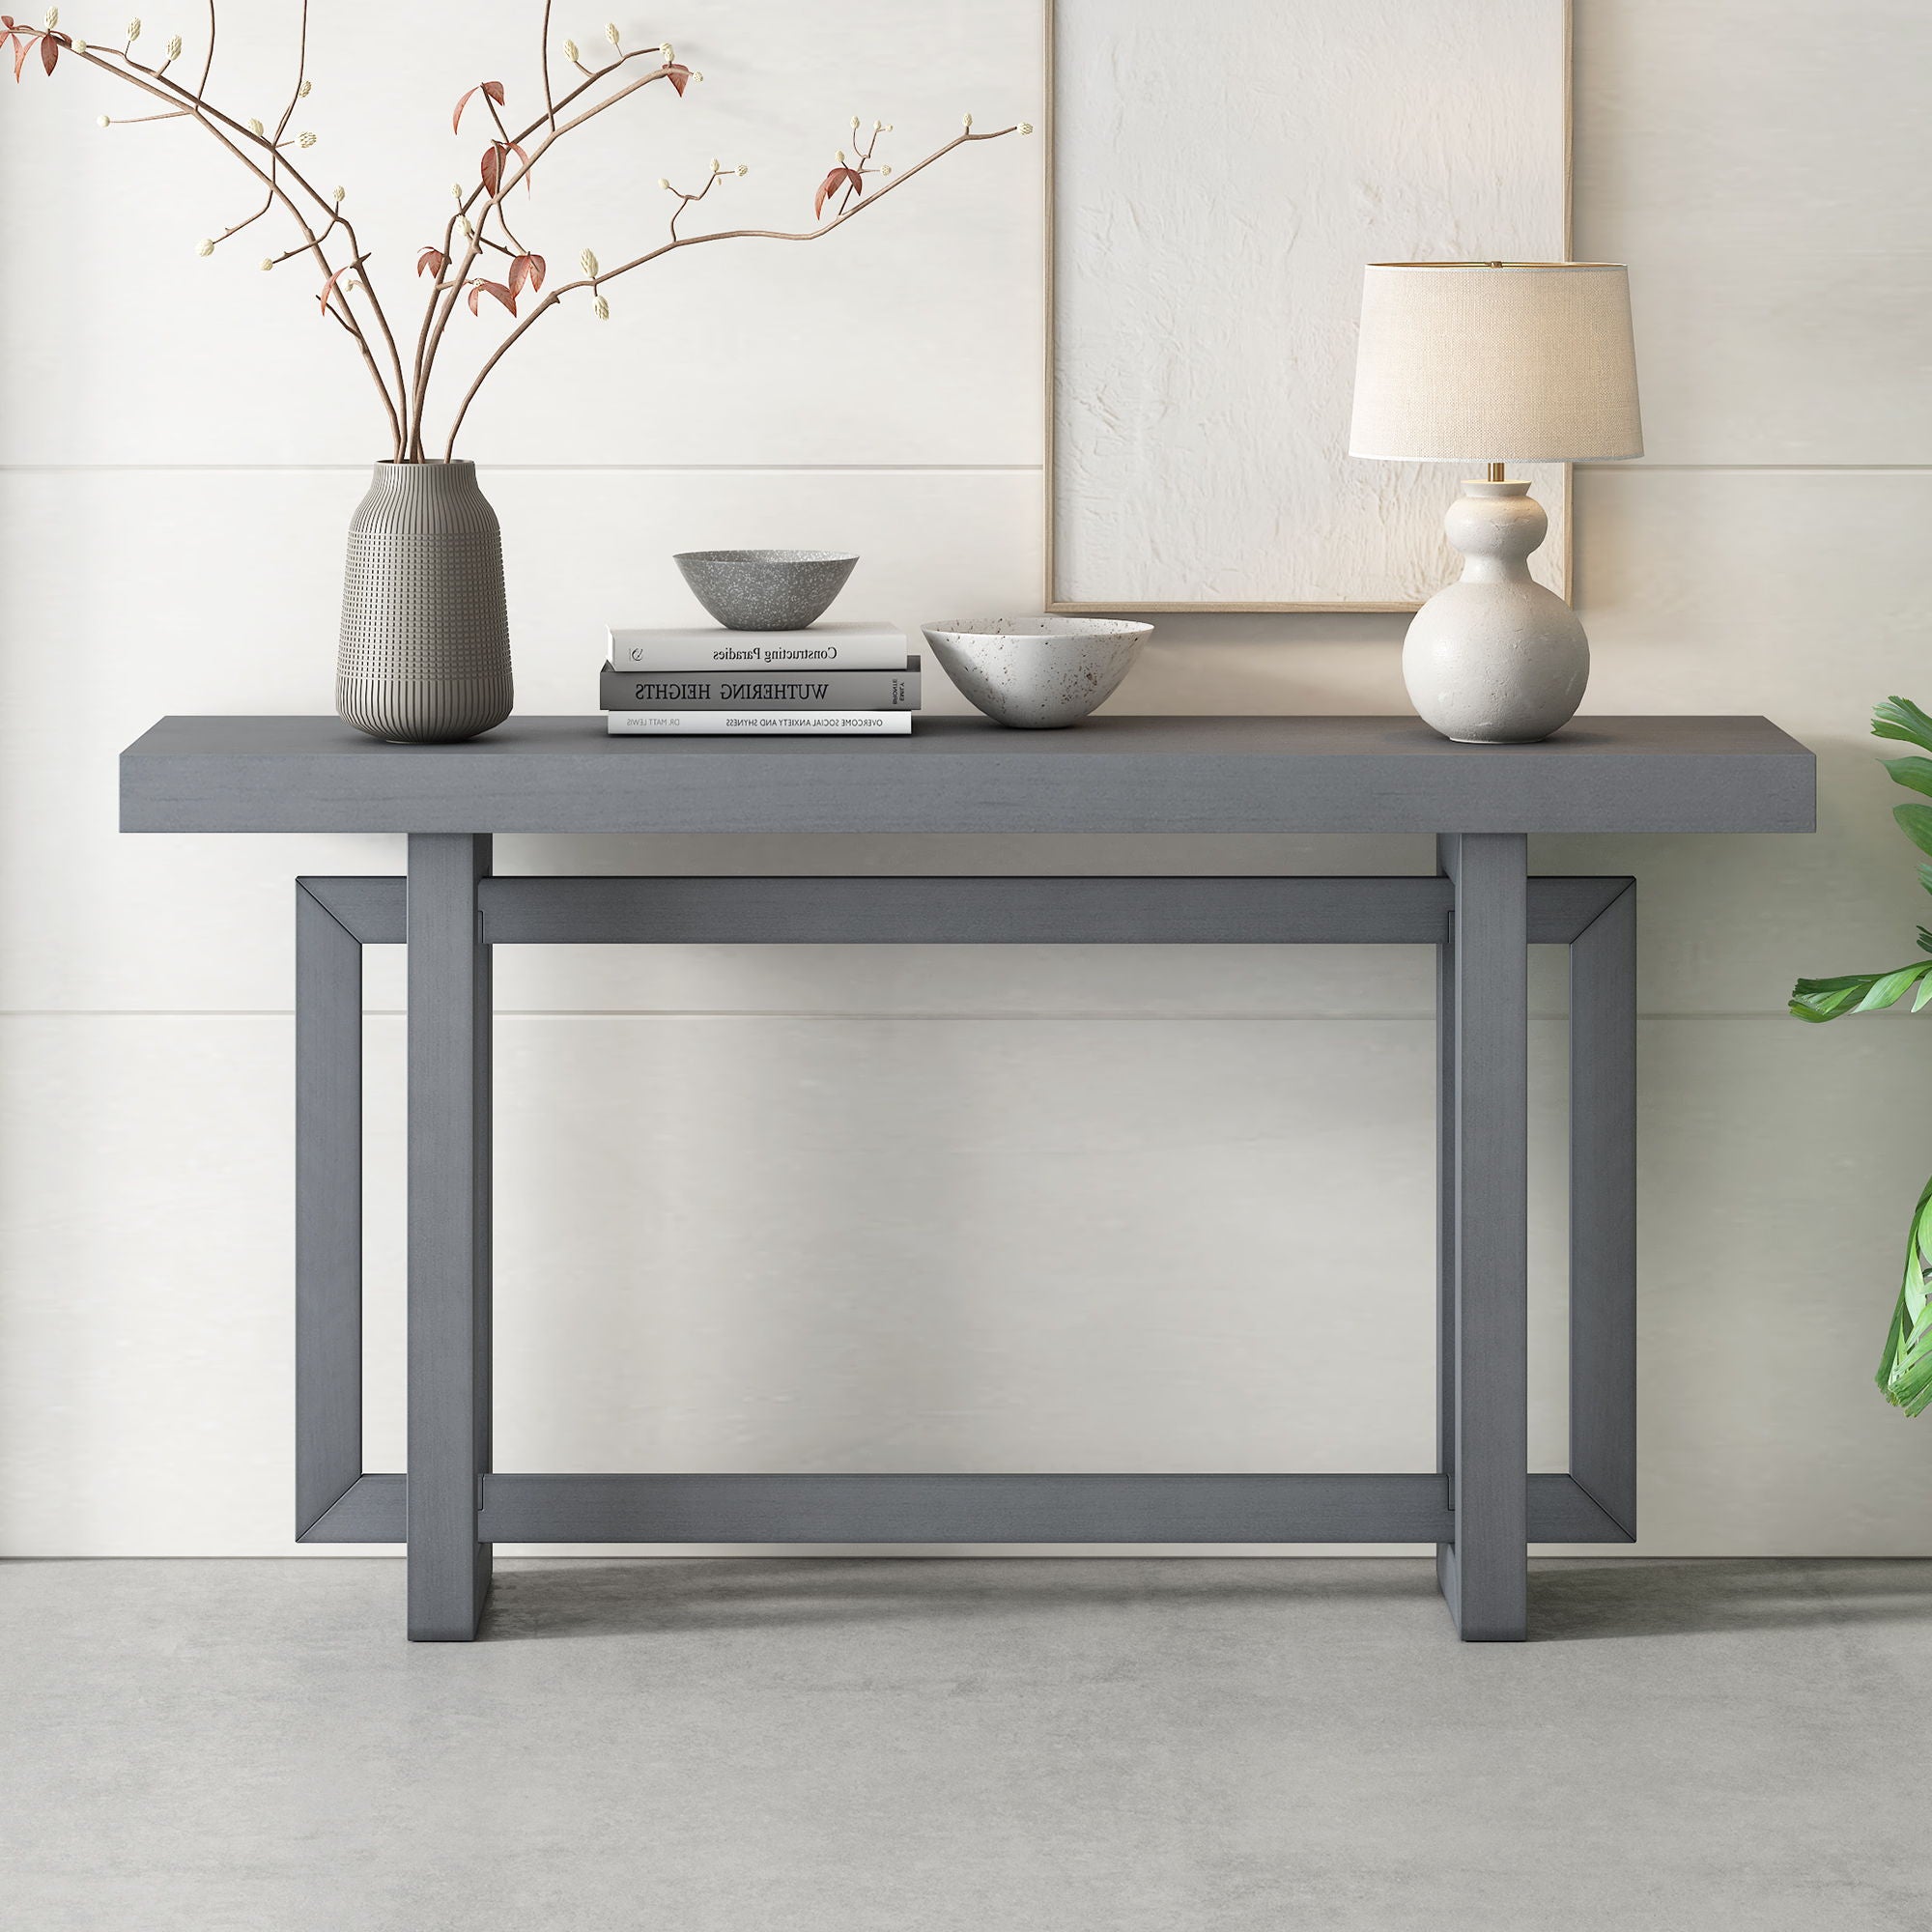 U_Style - Contemporary Console Table With Industrial - Inspired Concrete Wood Top, Extra Long Entryway Table For Entryway, Hallway, Foyer, Corridor